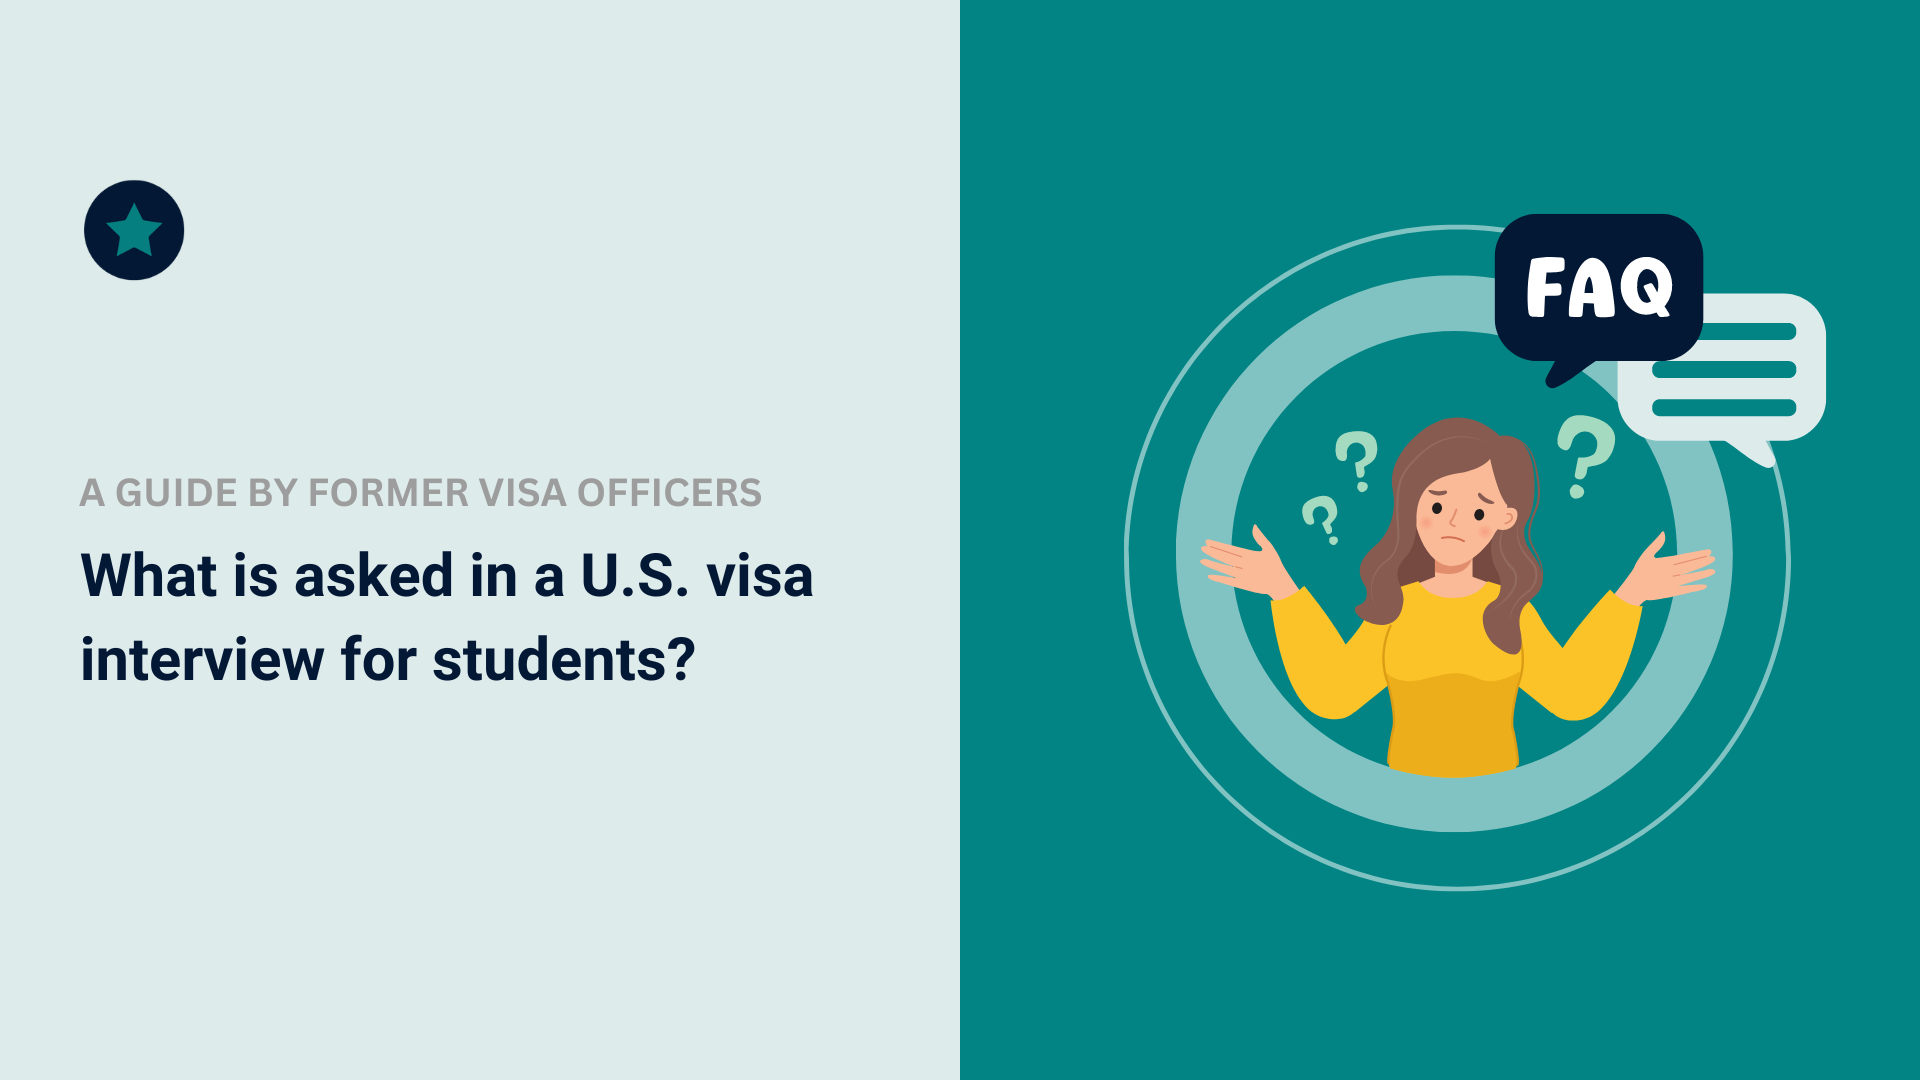 What is asked in a U.S. visa interview for students